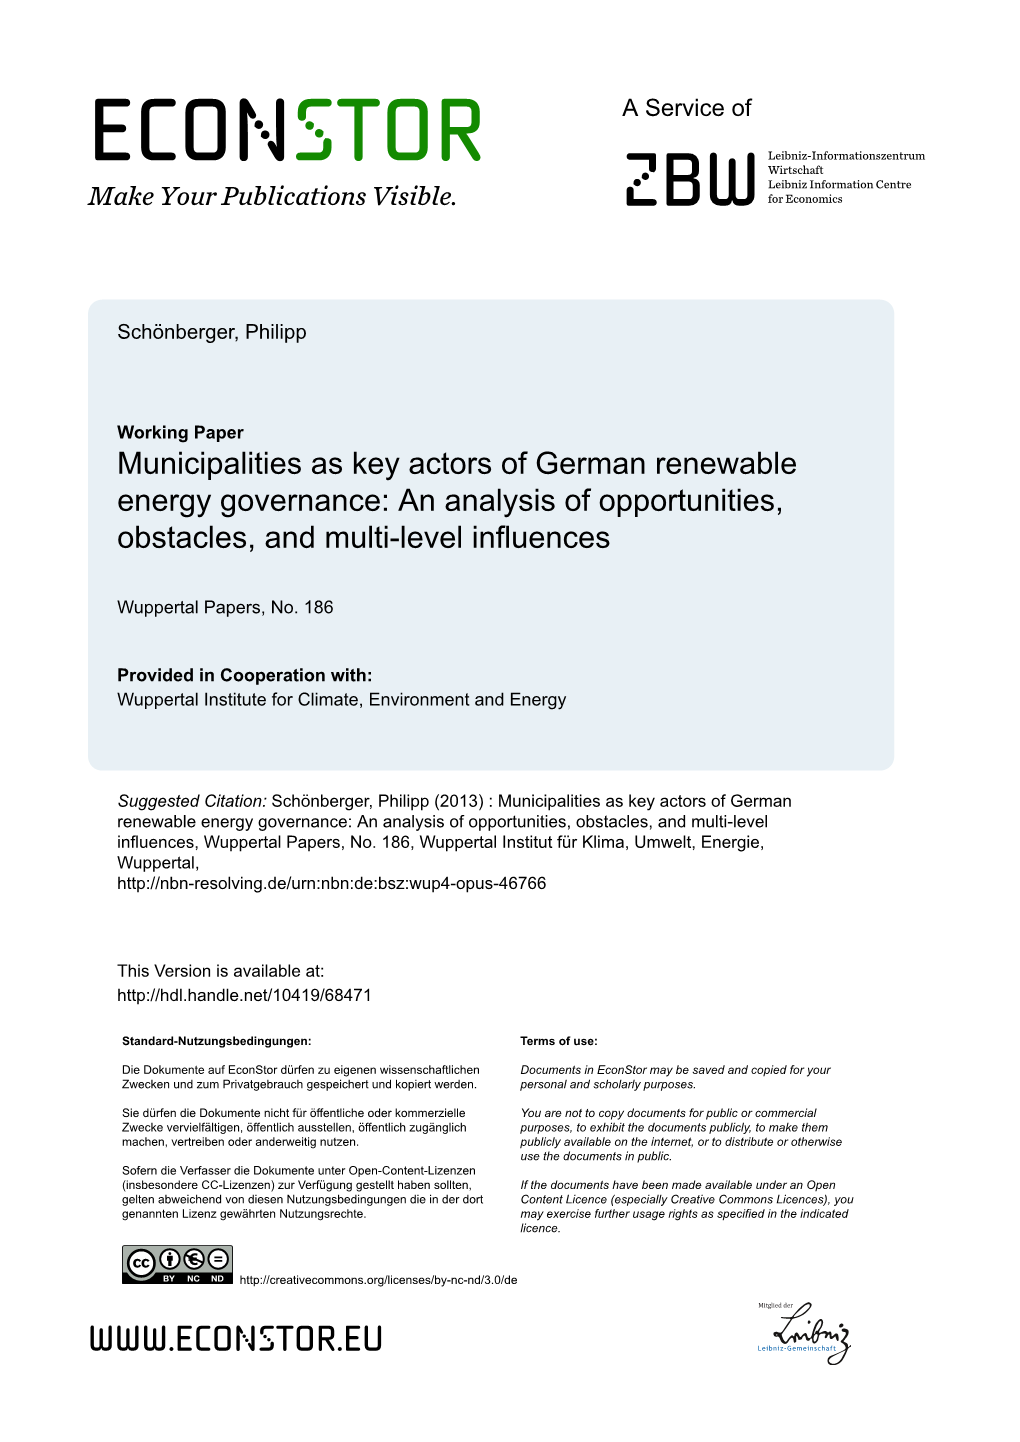 Municipalities As Key Actors of German Renewable Energy Governance: an Analysis of Opportunities, Obstacles, and Multi-Level Influences